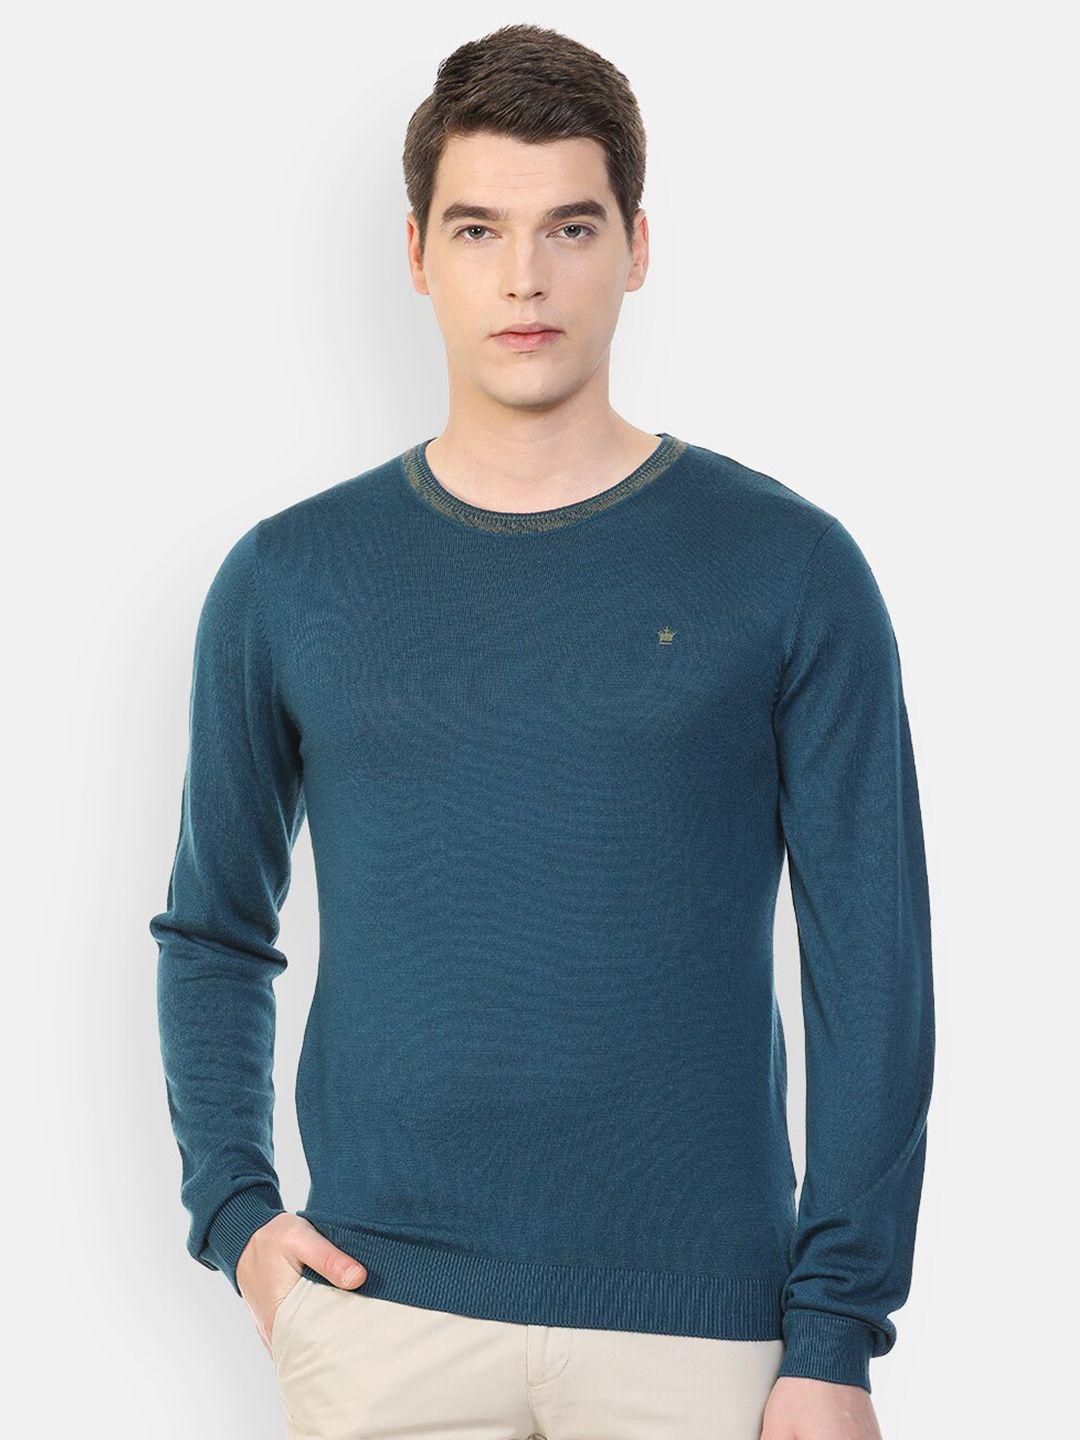 louis philippe men teal blue pullover